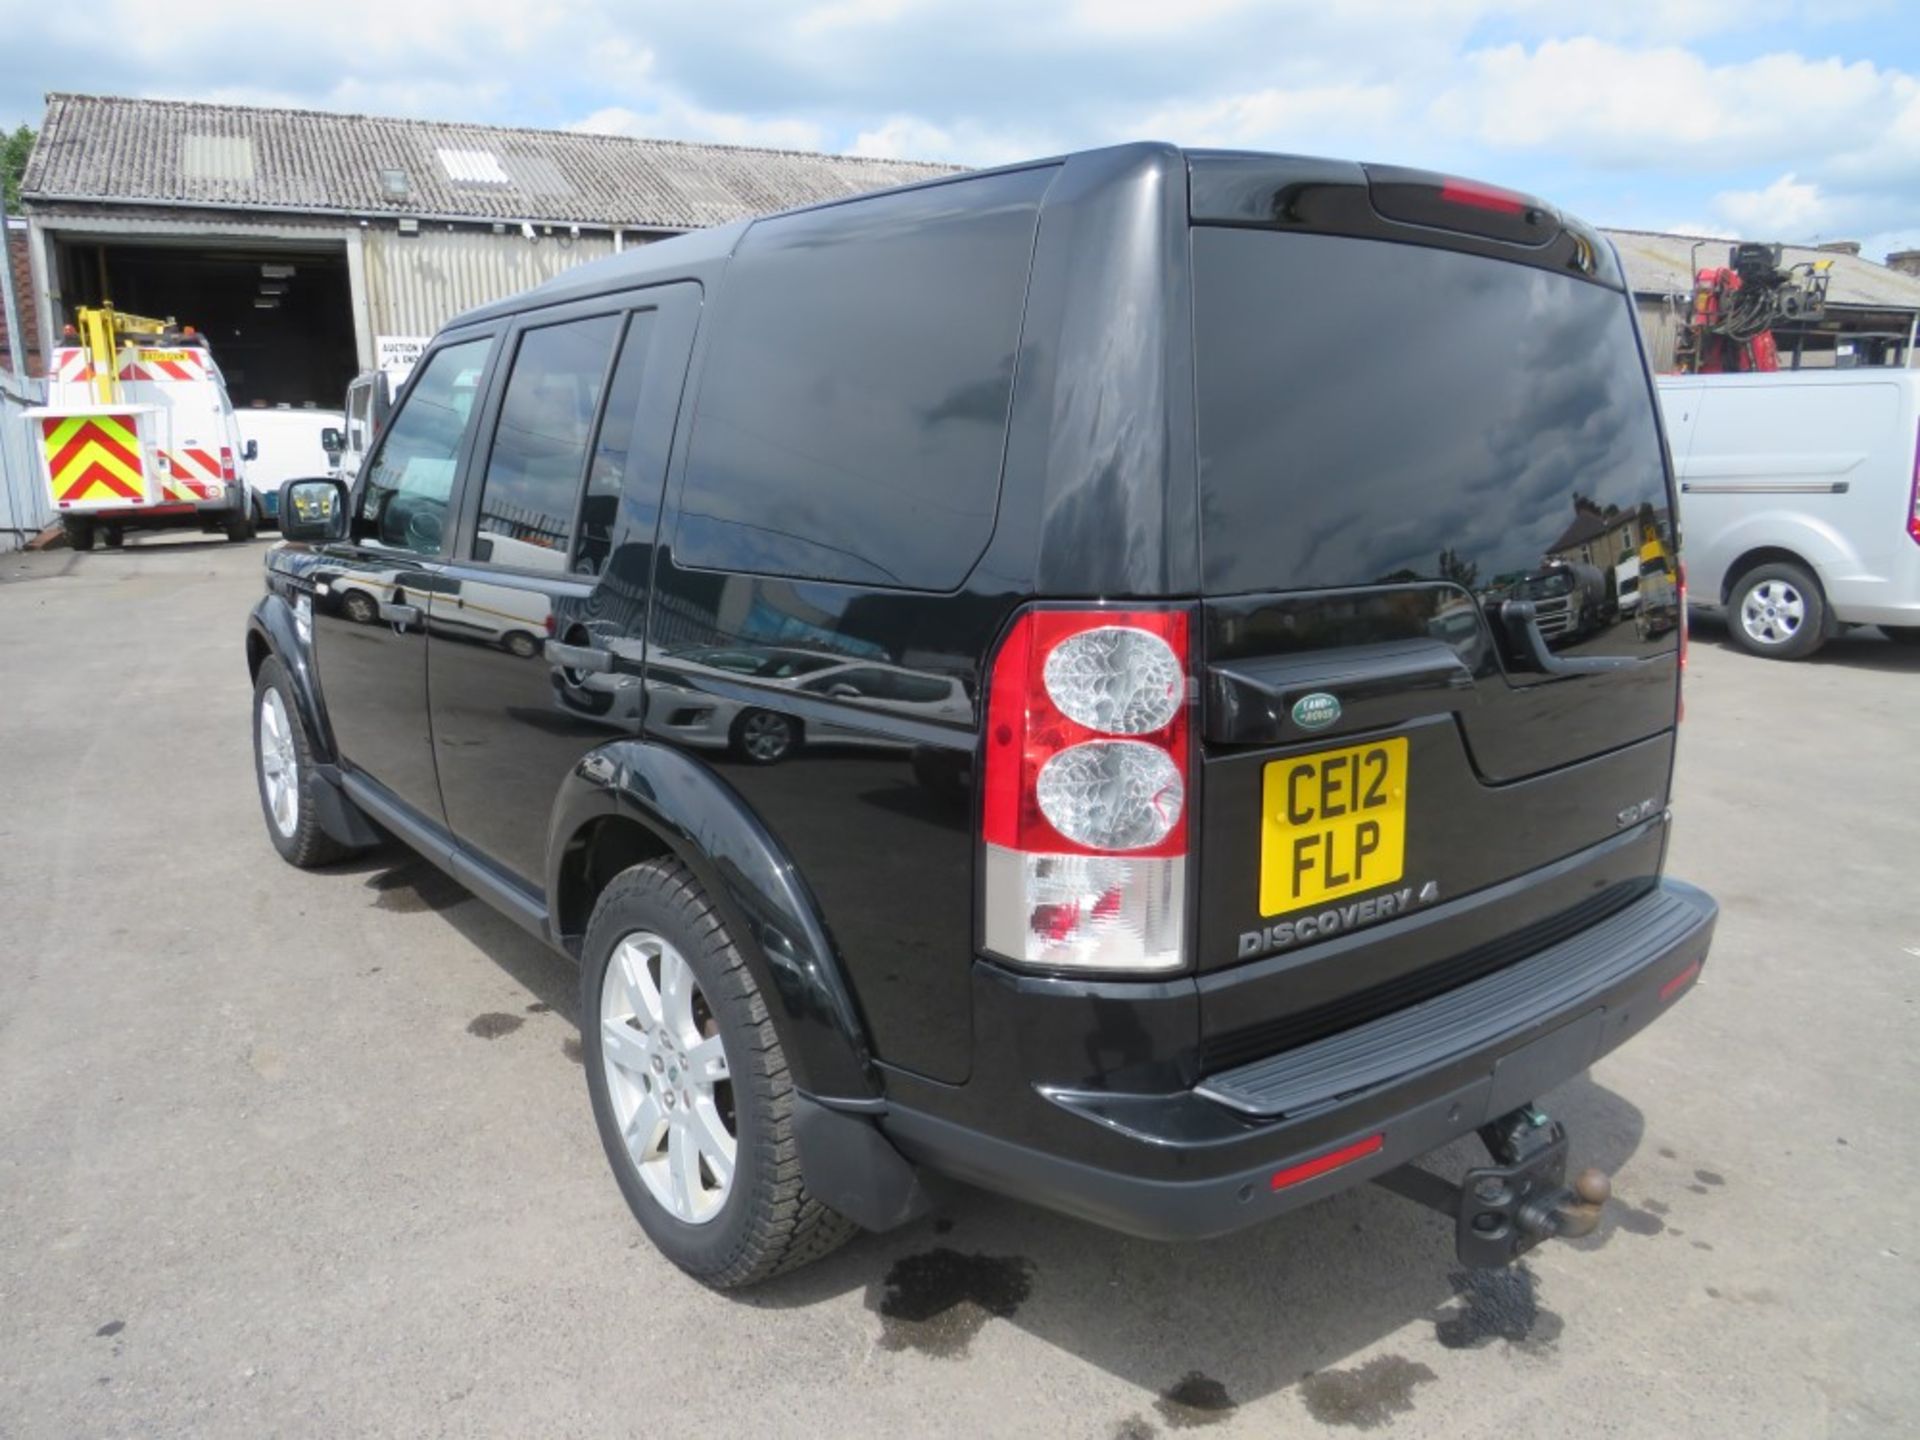 12 reg LAND ROVER DISCOVERY SDV6 AUTO 255 - Â£4000 SEAT CONVERSION IN BACK, 1ST REG 03/12, TEST 01/ - Image 3 of 7